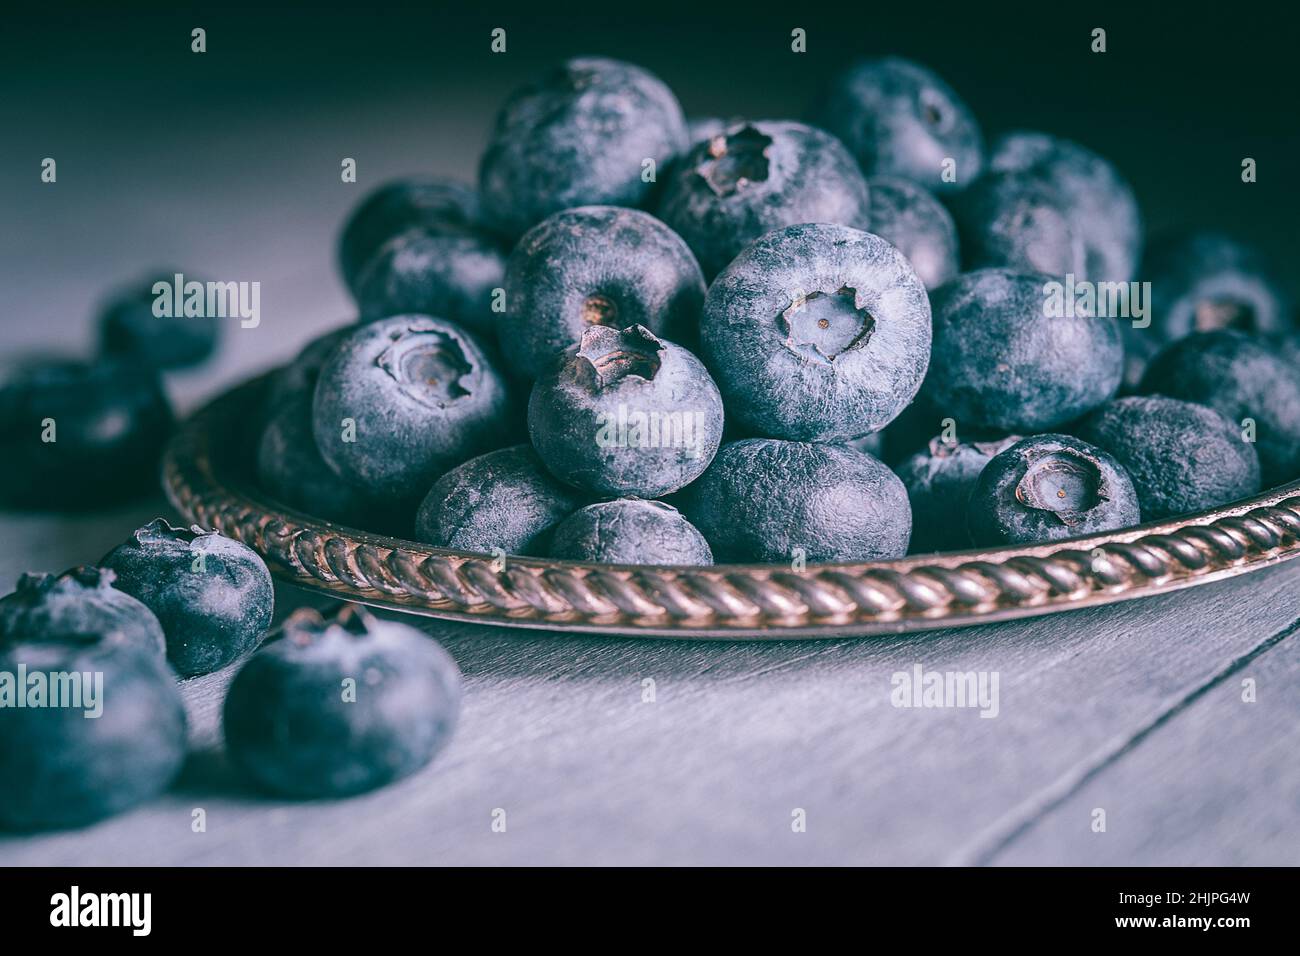 Blueberry antioxidant organic superfood in a bowl Stock Photo